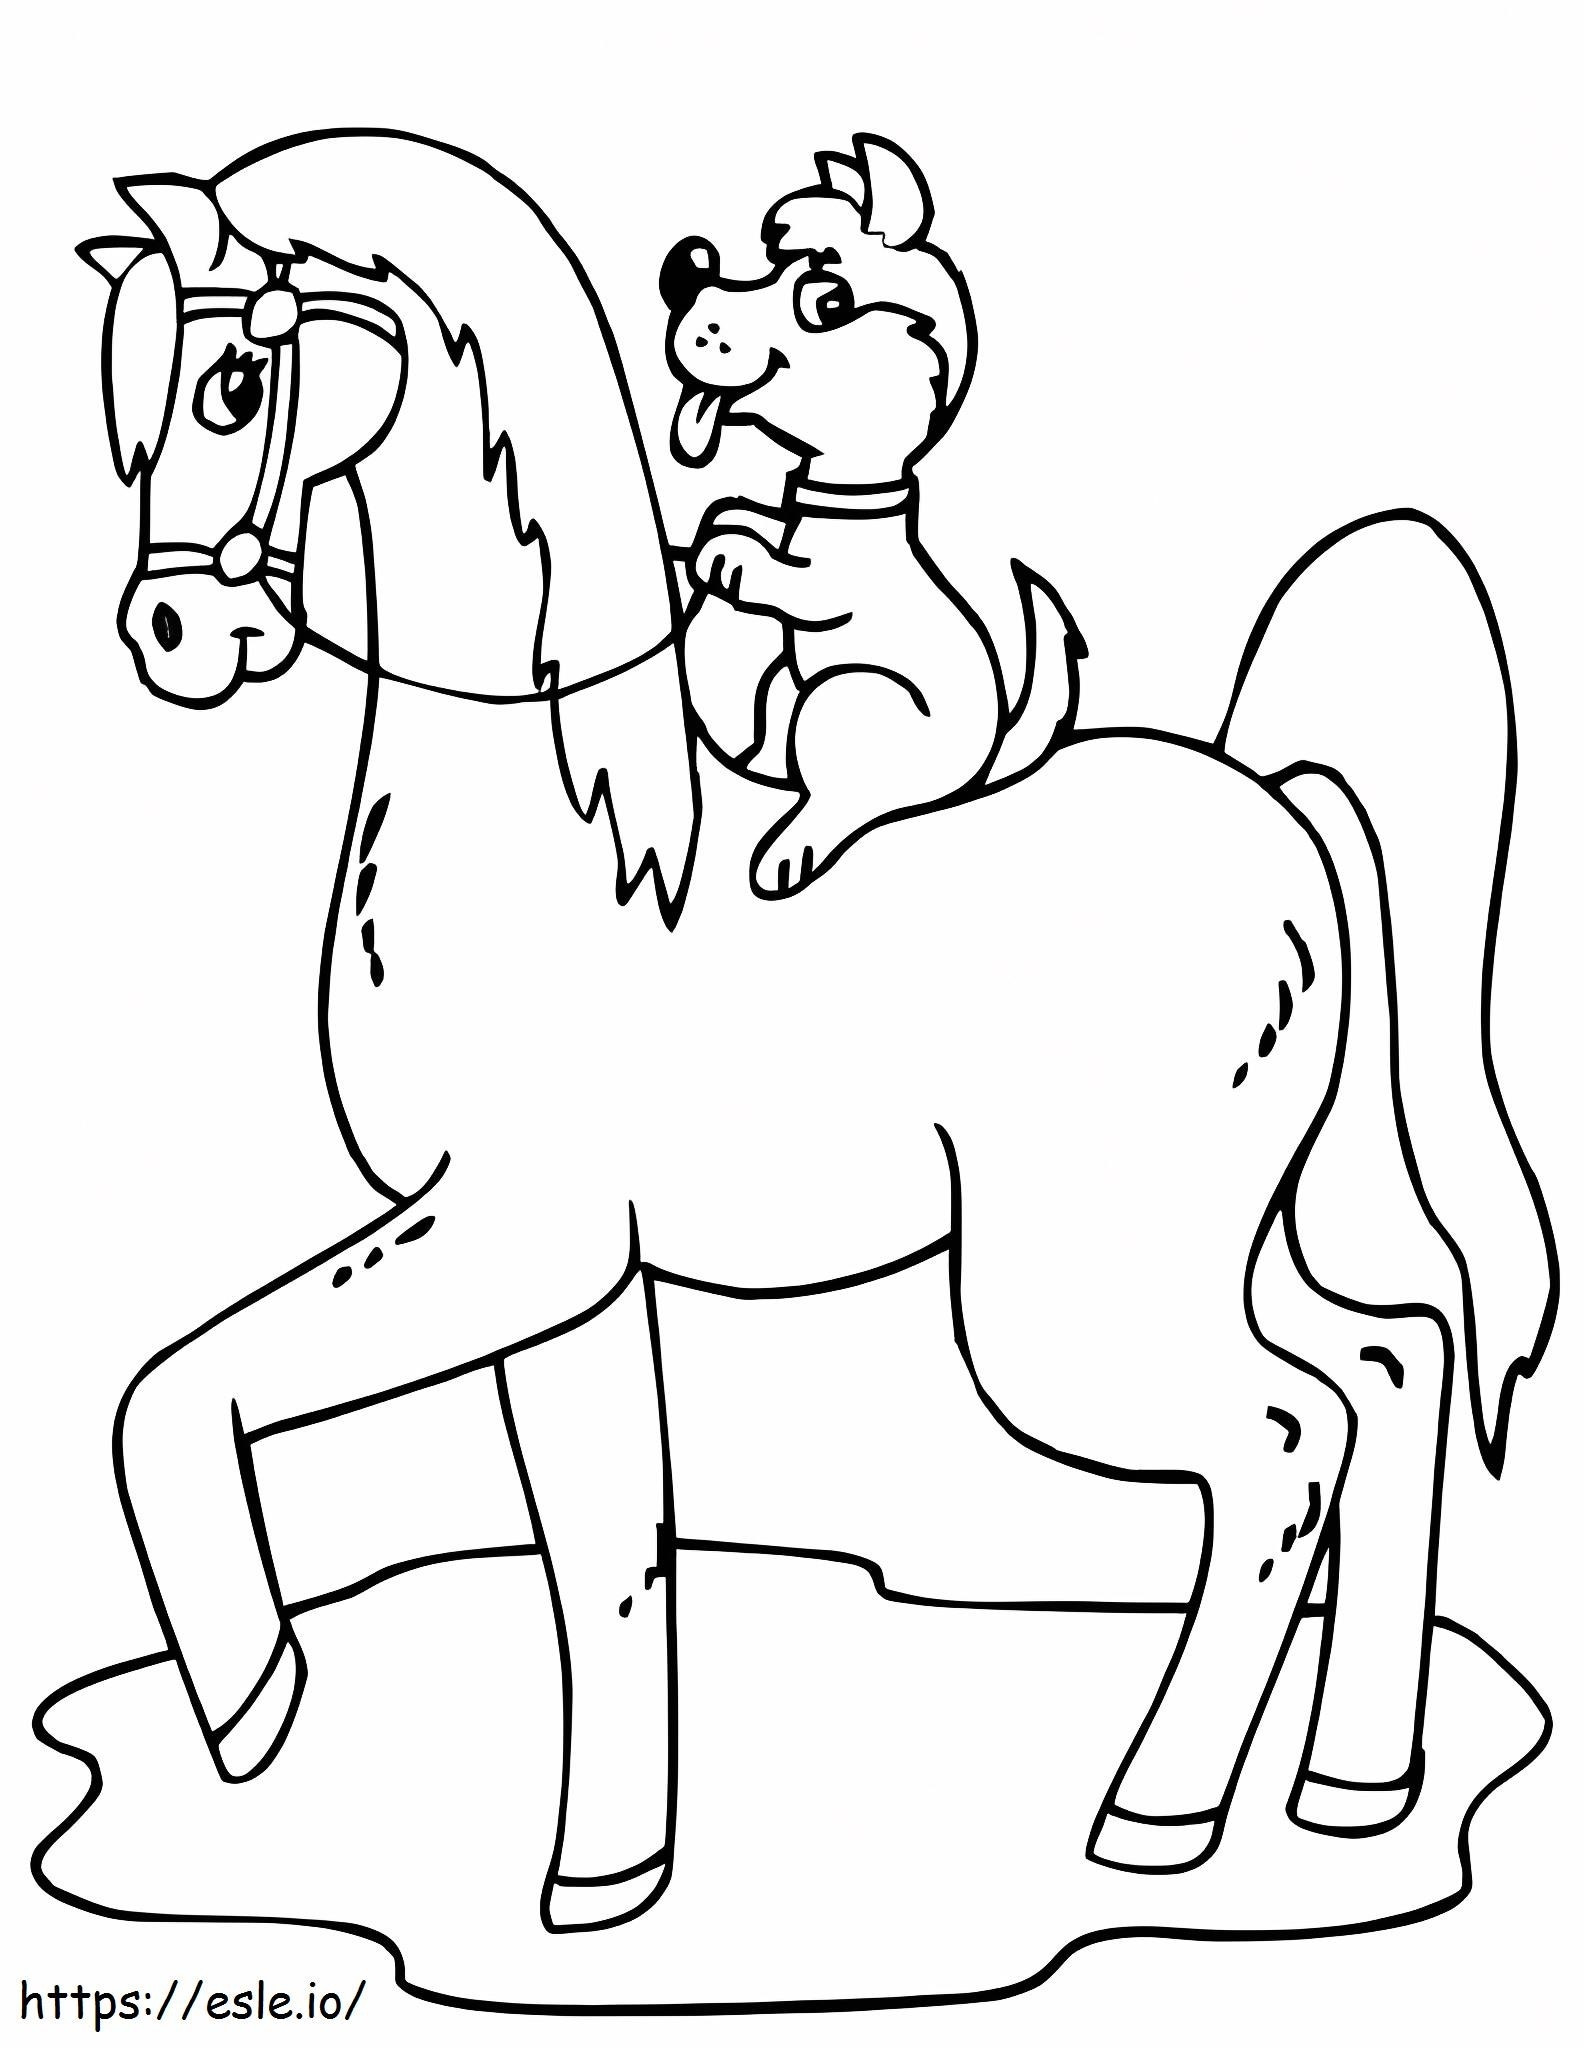 Dog Riding Horse coloring page